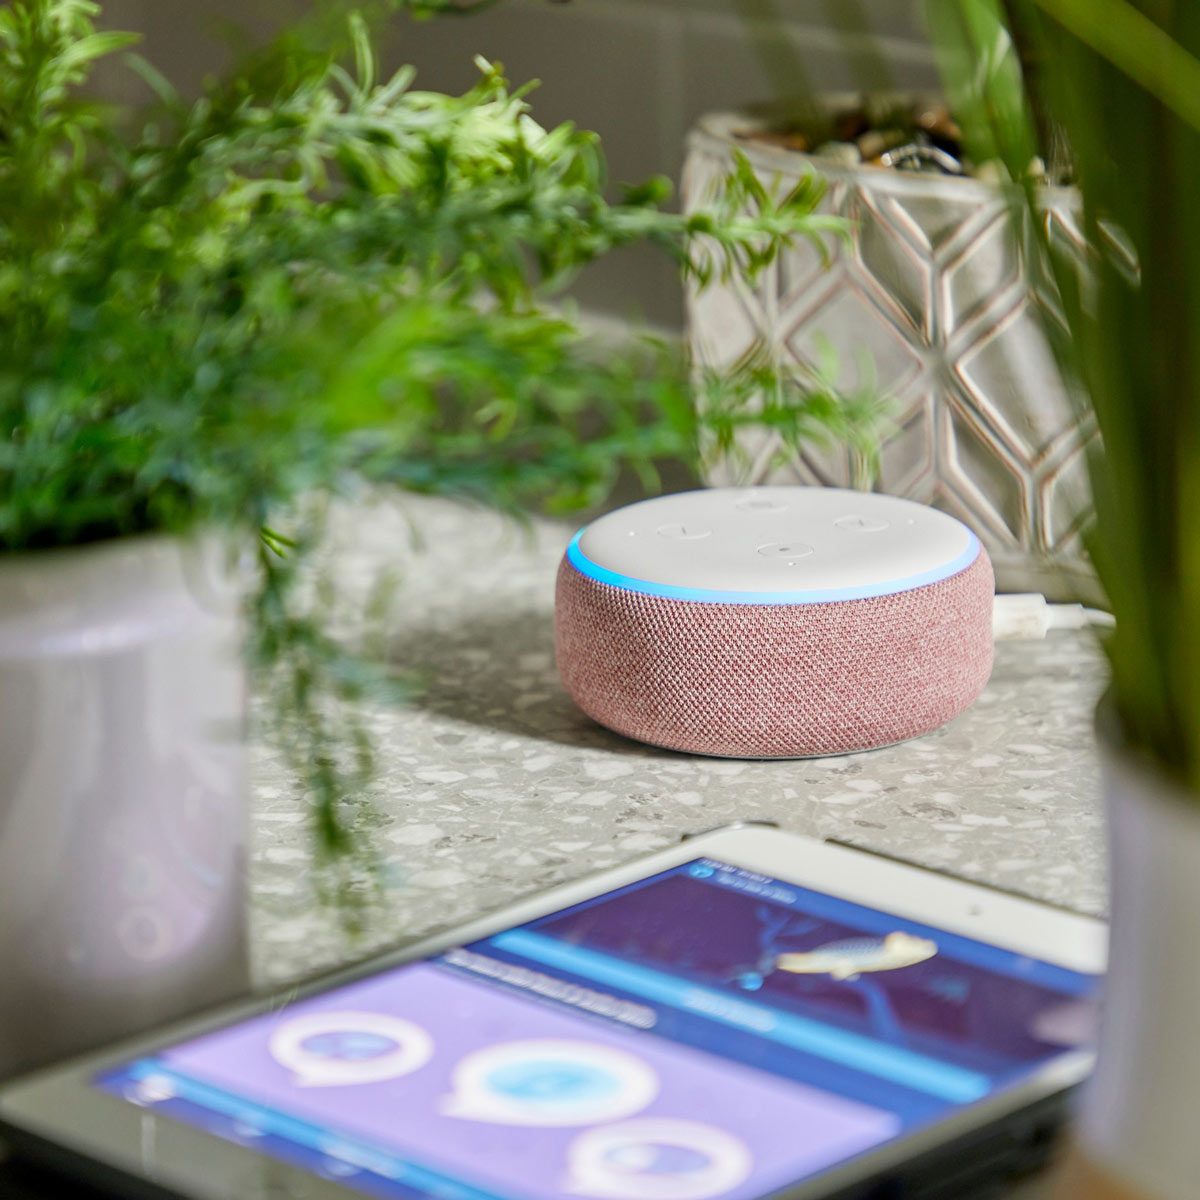 How to Set Up the Amazon Echo Dot